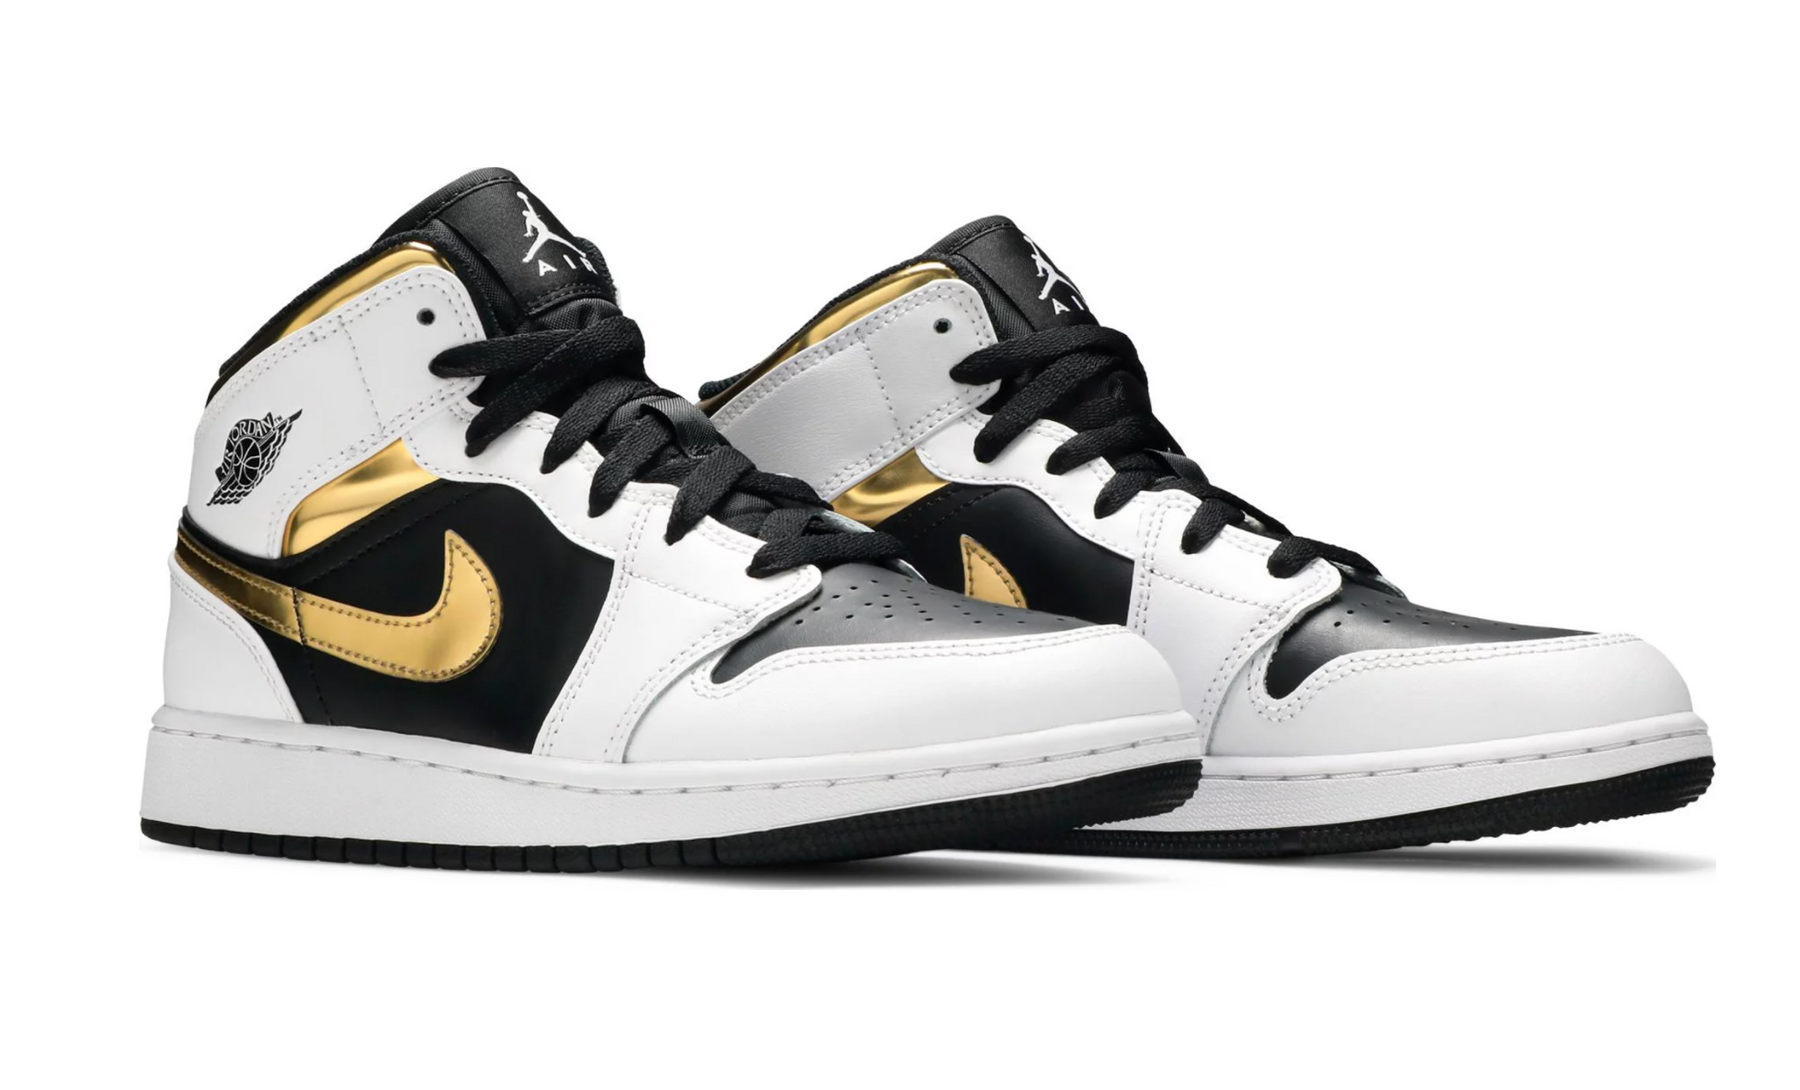 Nike Air Jordan 1 Mid White Gold Black (GS) Women's | Afterpay It Now ...